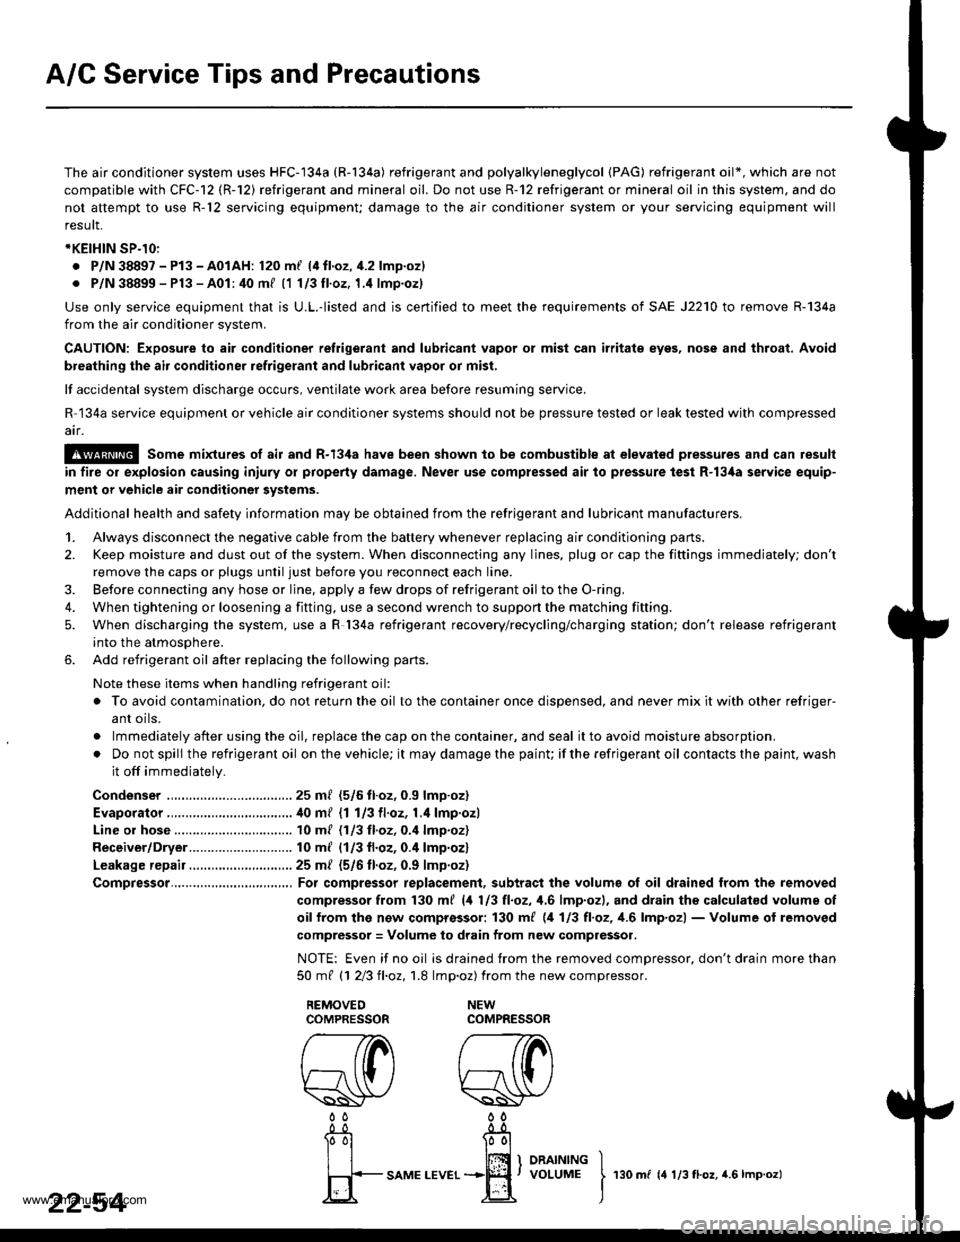 HONDA CR-V 1999 RD1-RD3 / 1.G User Guide 
A/C Service Tips and Precautions
The air conditioner system uses HFC-134a (R-134a) refrigerant and polyalkyleneglycol {PAG) refrigerant oil*, which are not
compatible with CFC-12 (R-12) refrigerant 